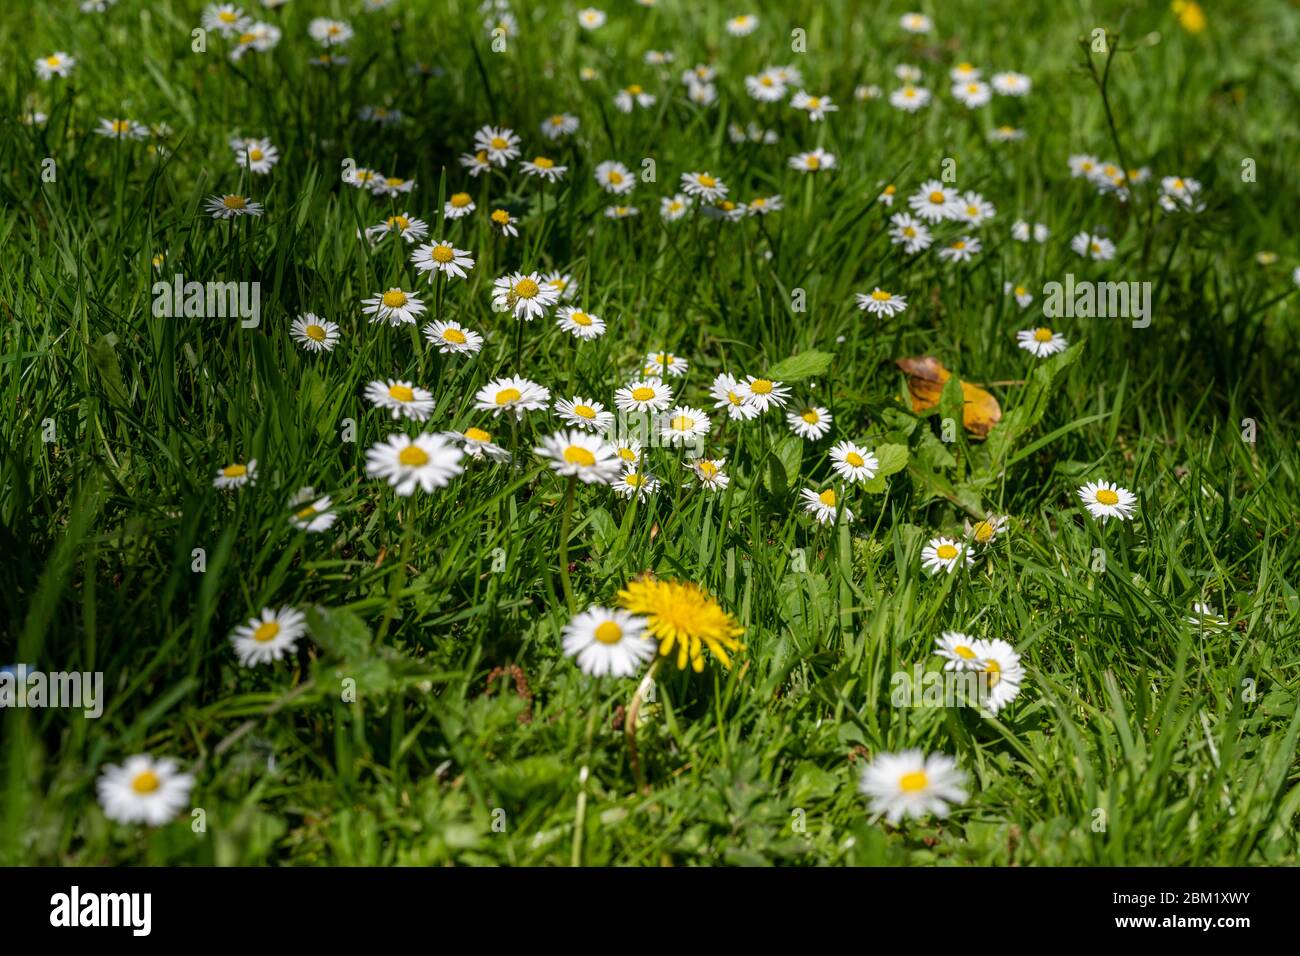 Patch of common daisies [Bellis perennis] in a lawn on a sunny summers day in the UK Stock Photo